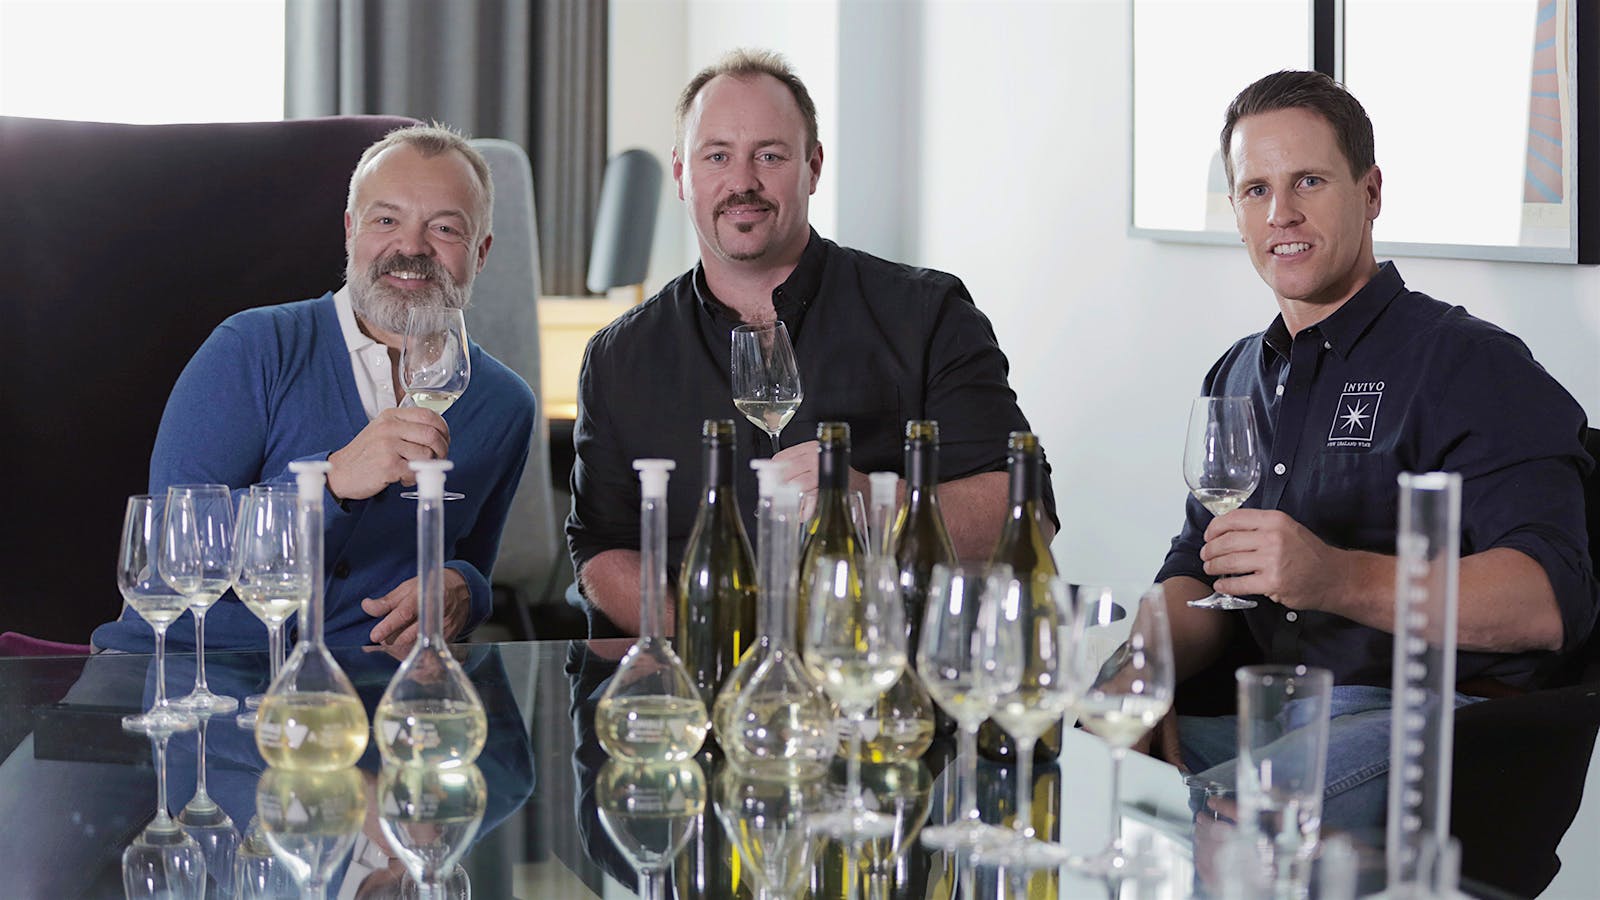 Graham Norton Becomes Chief Winemaker for a Day